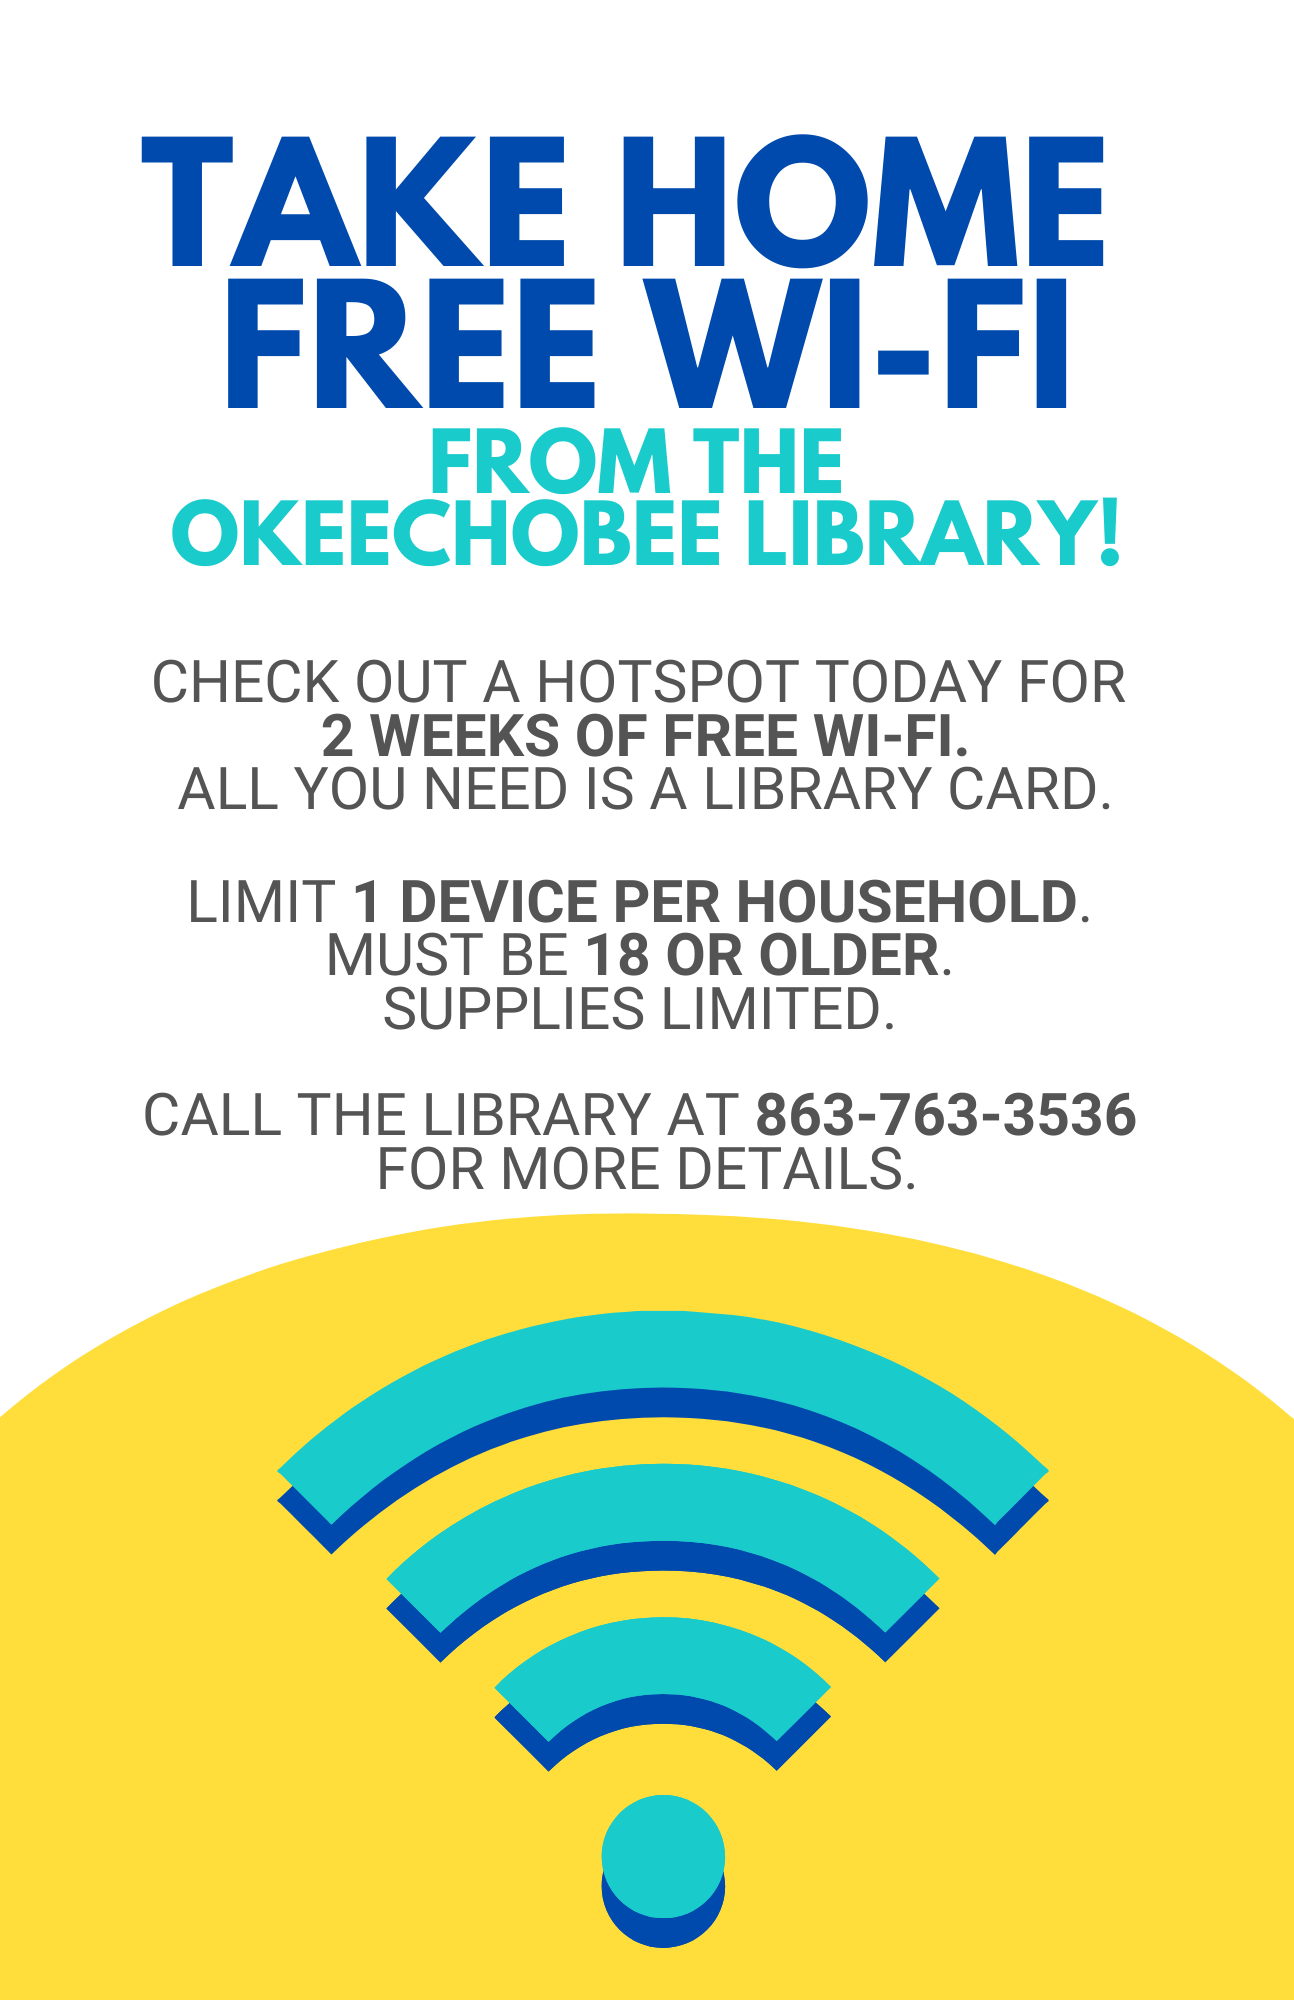 Take Home free Wi-Fi from the Okeechobee Library! Check out a hotspot today for 2 weeks of free Wi-Fi. All you need is a library card. Limit 1 device per household. Must be 18 or older. Supplies limited. Call the Library at 863-763-3536 for more details.